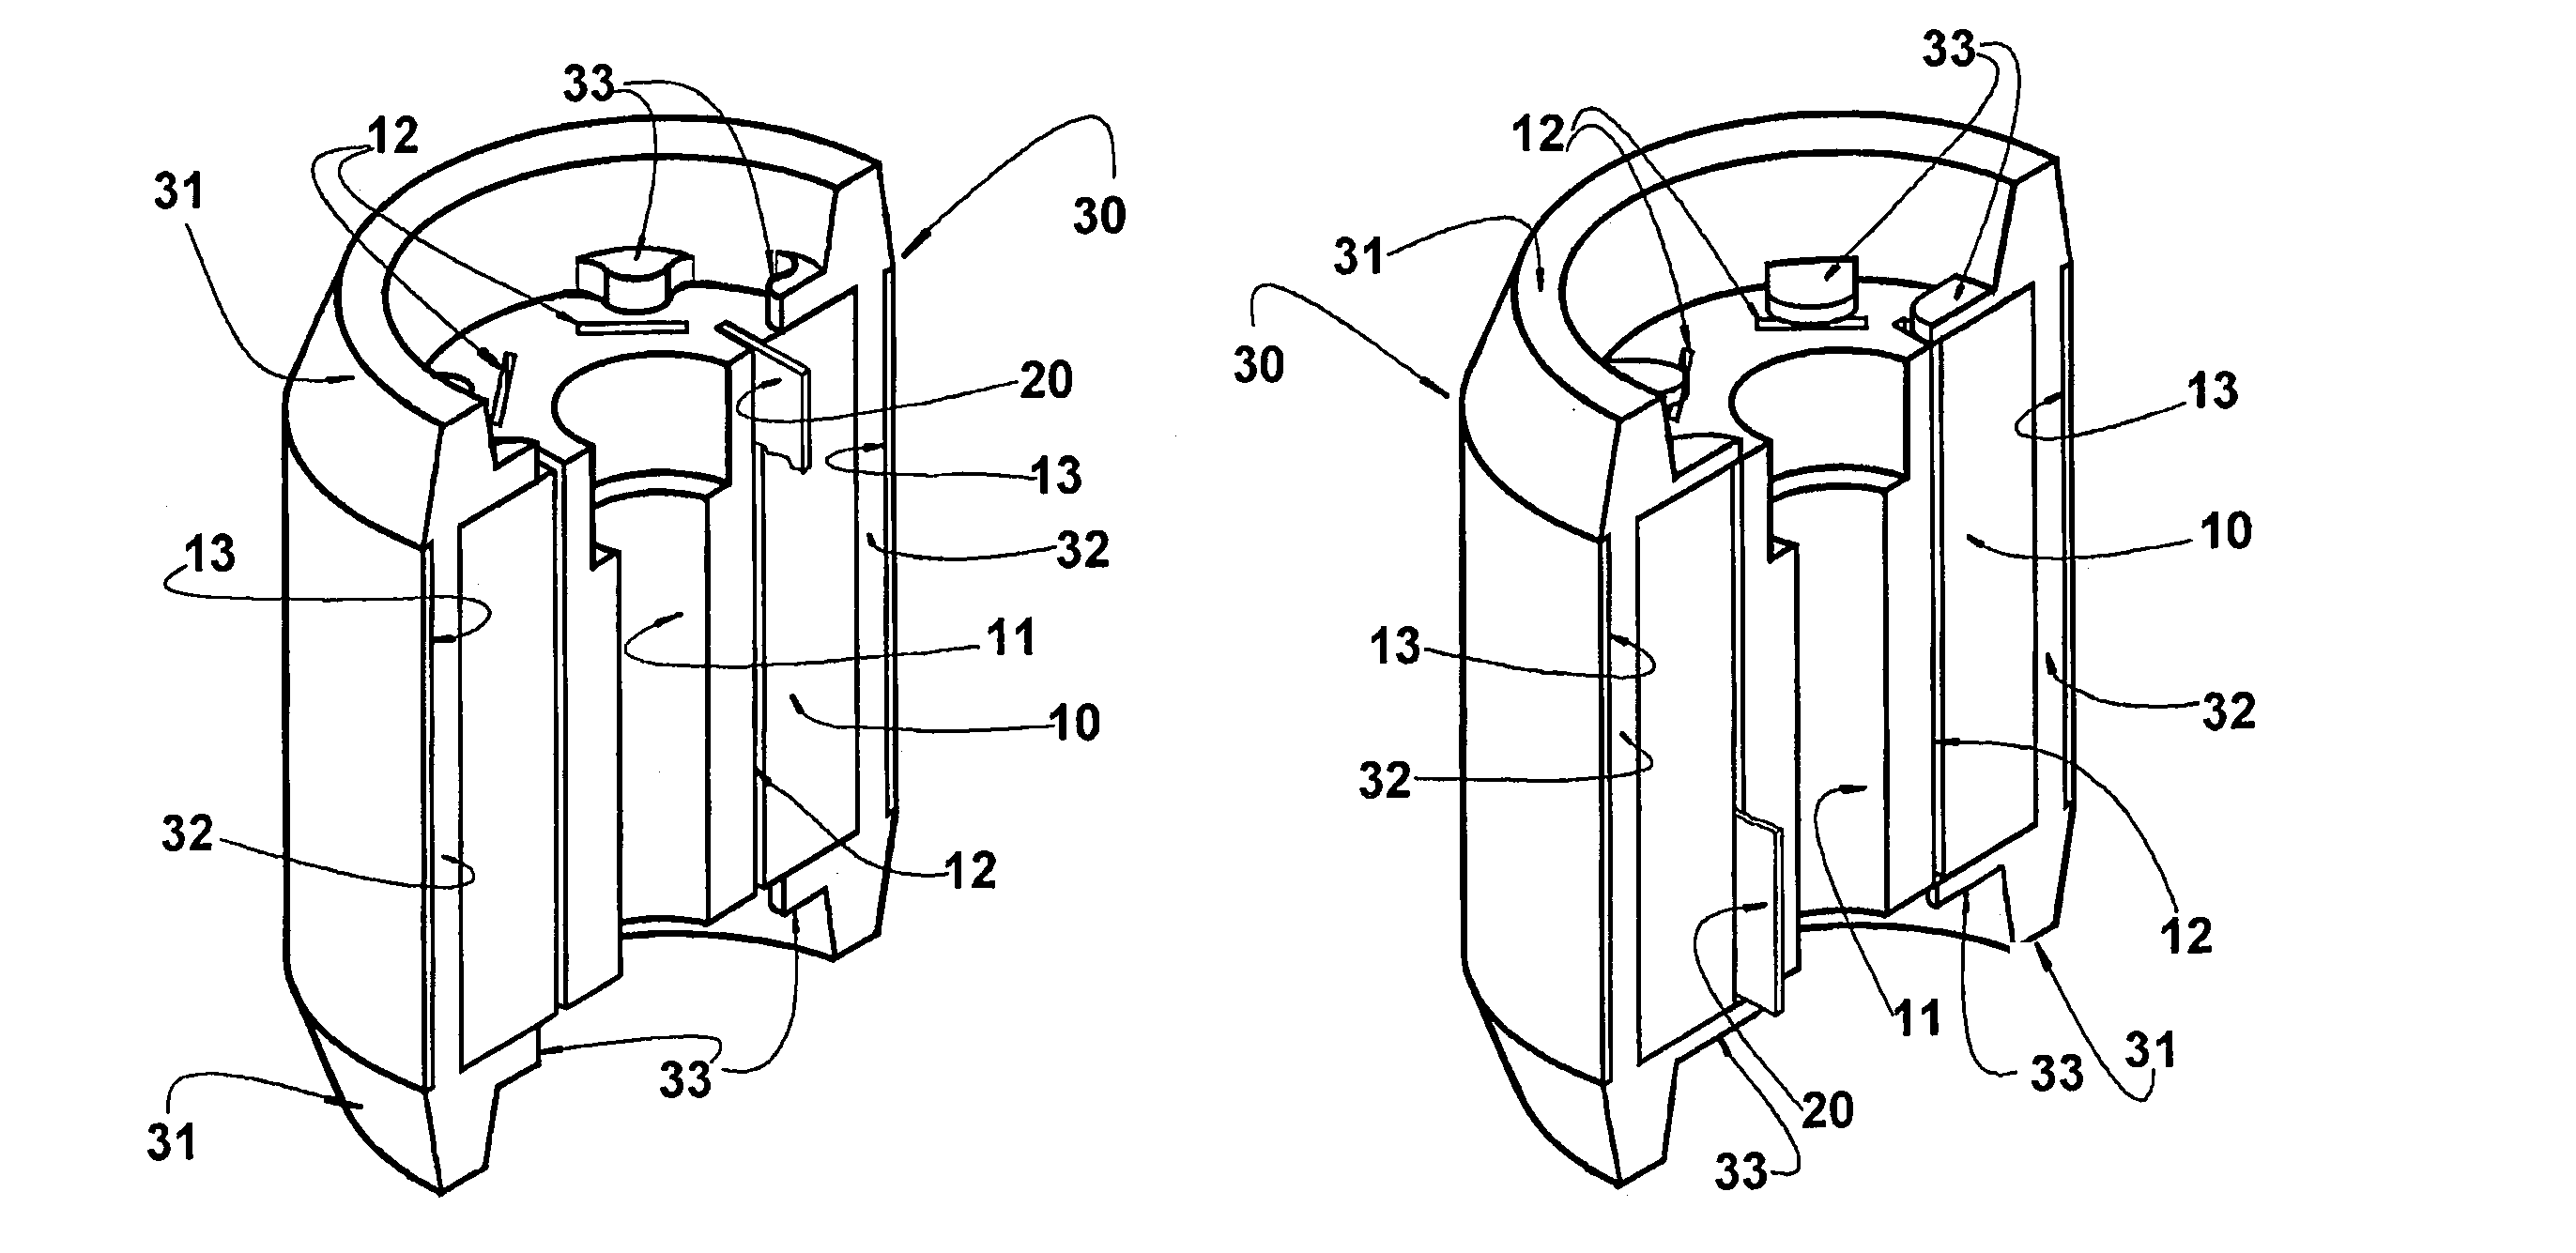 Process for mounting magnets in an electric motor rotor